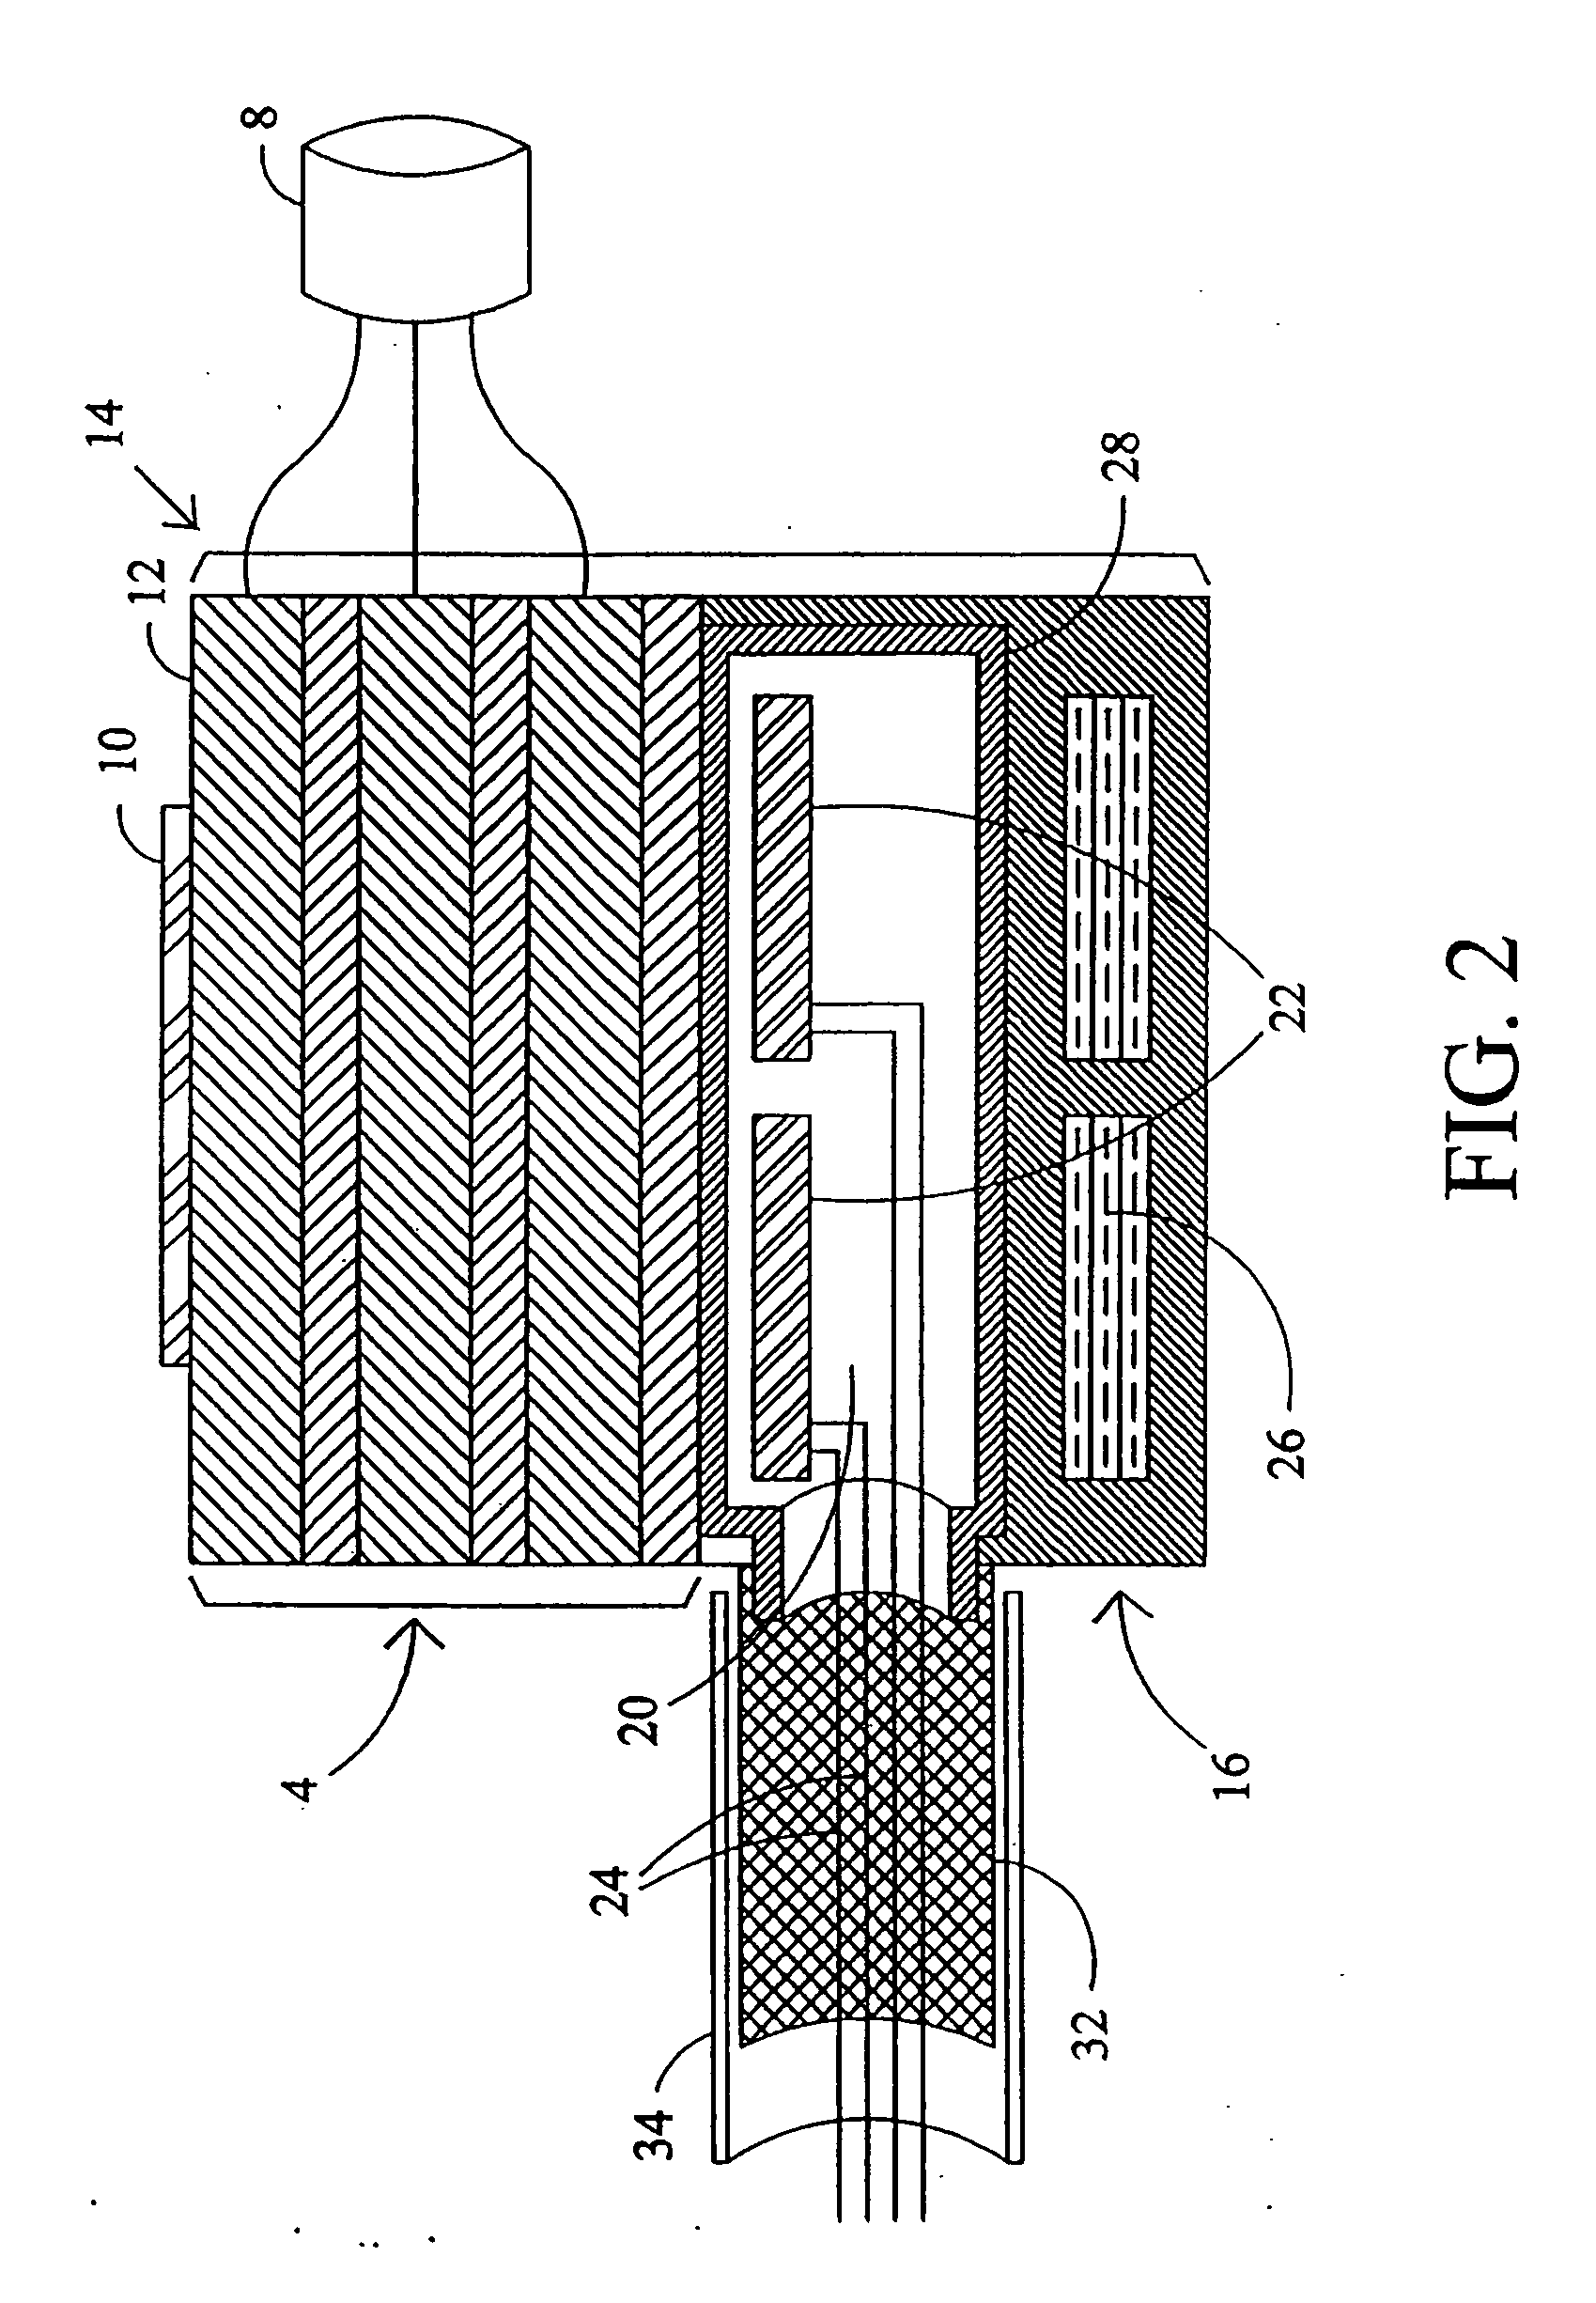 Probe station thermal chuck with shielding for capacitive current